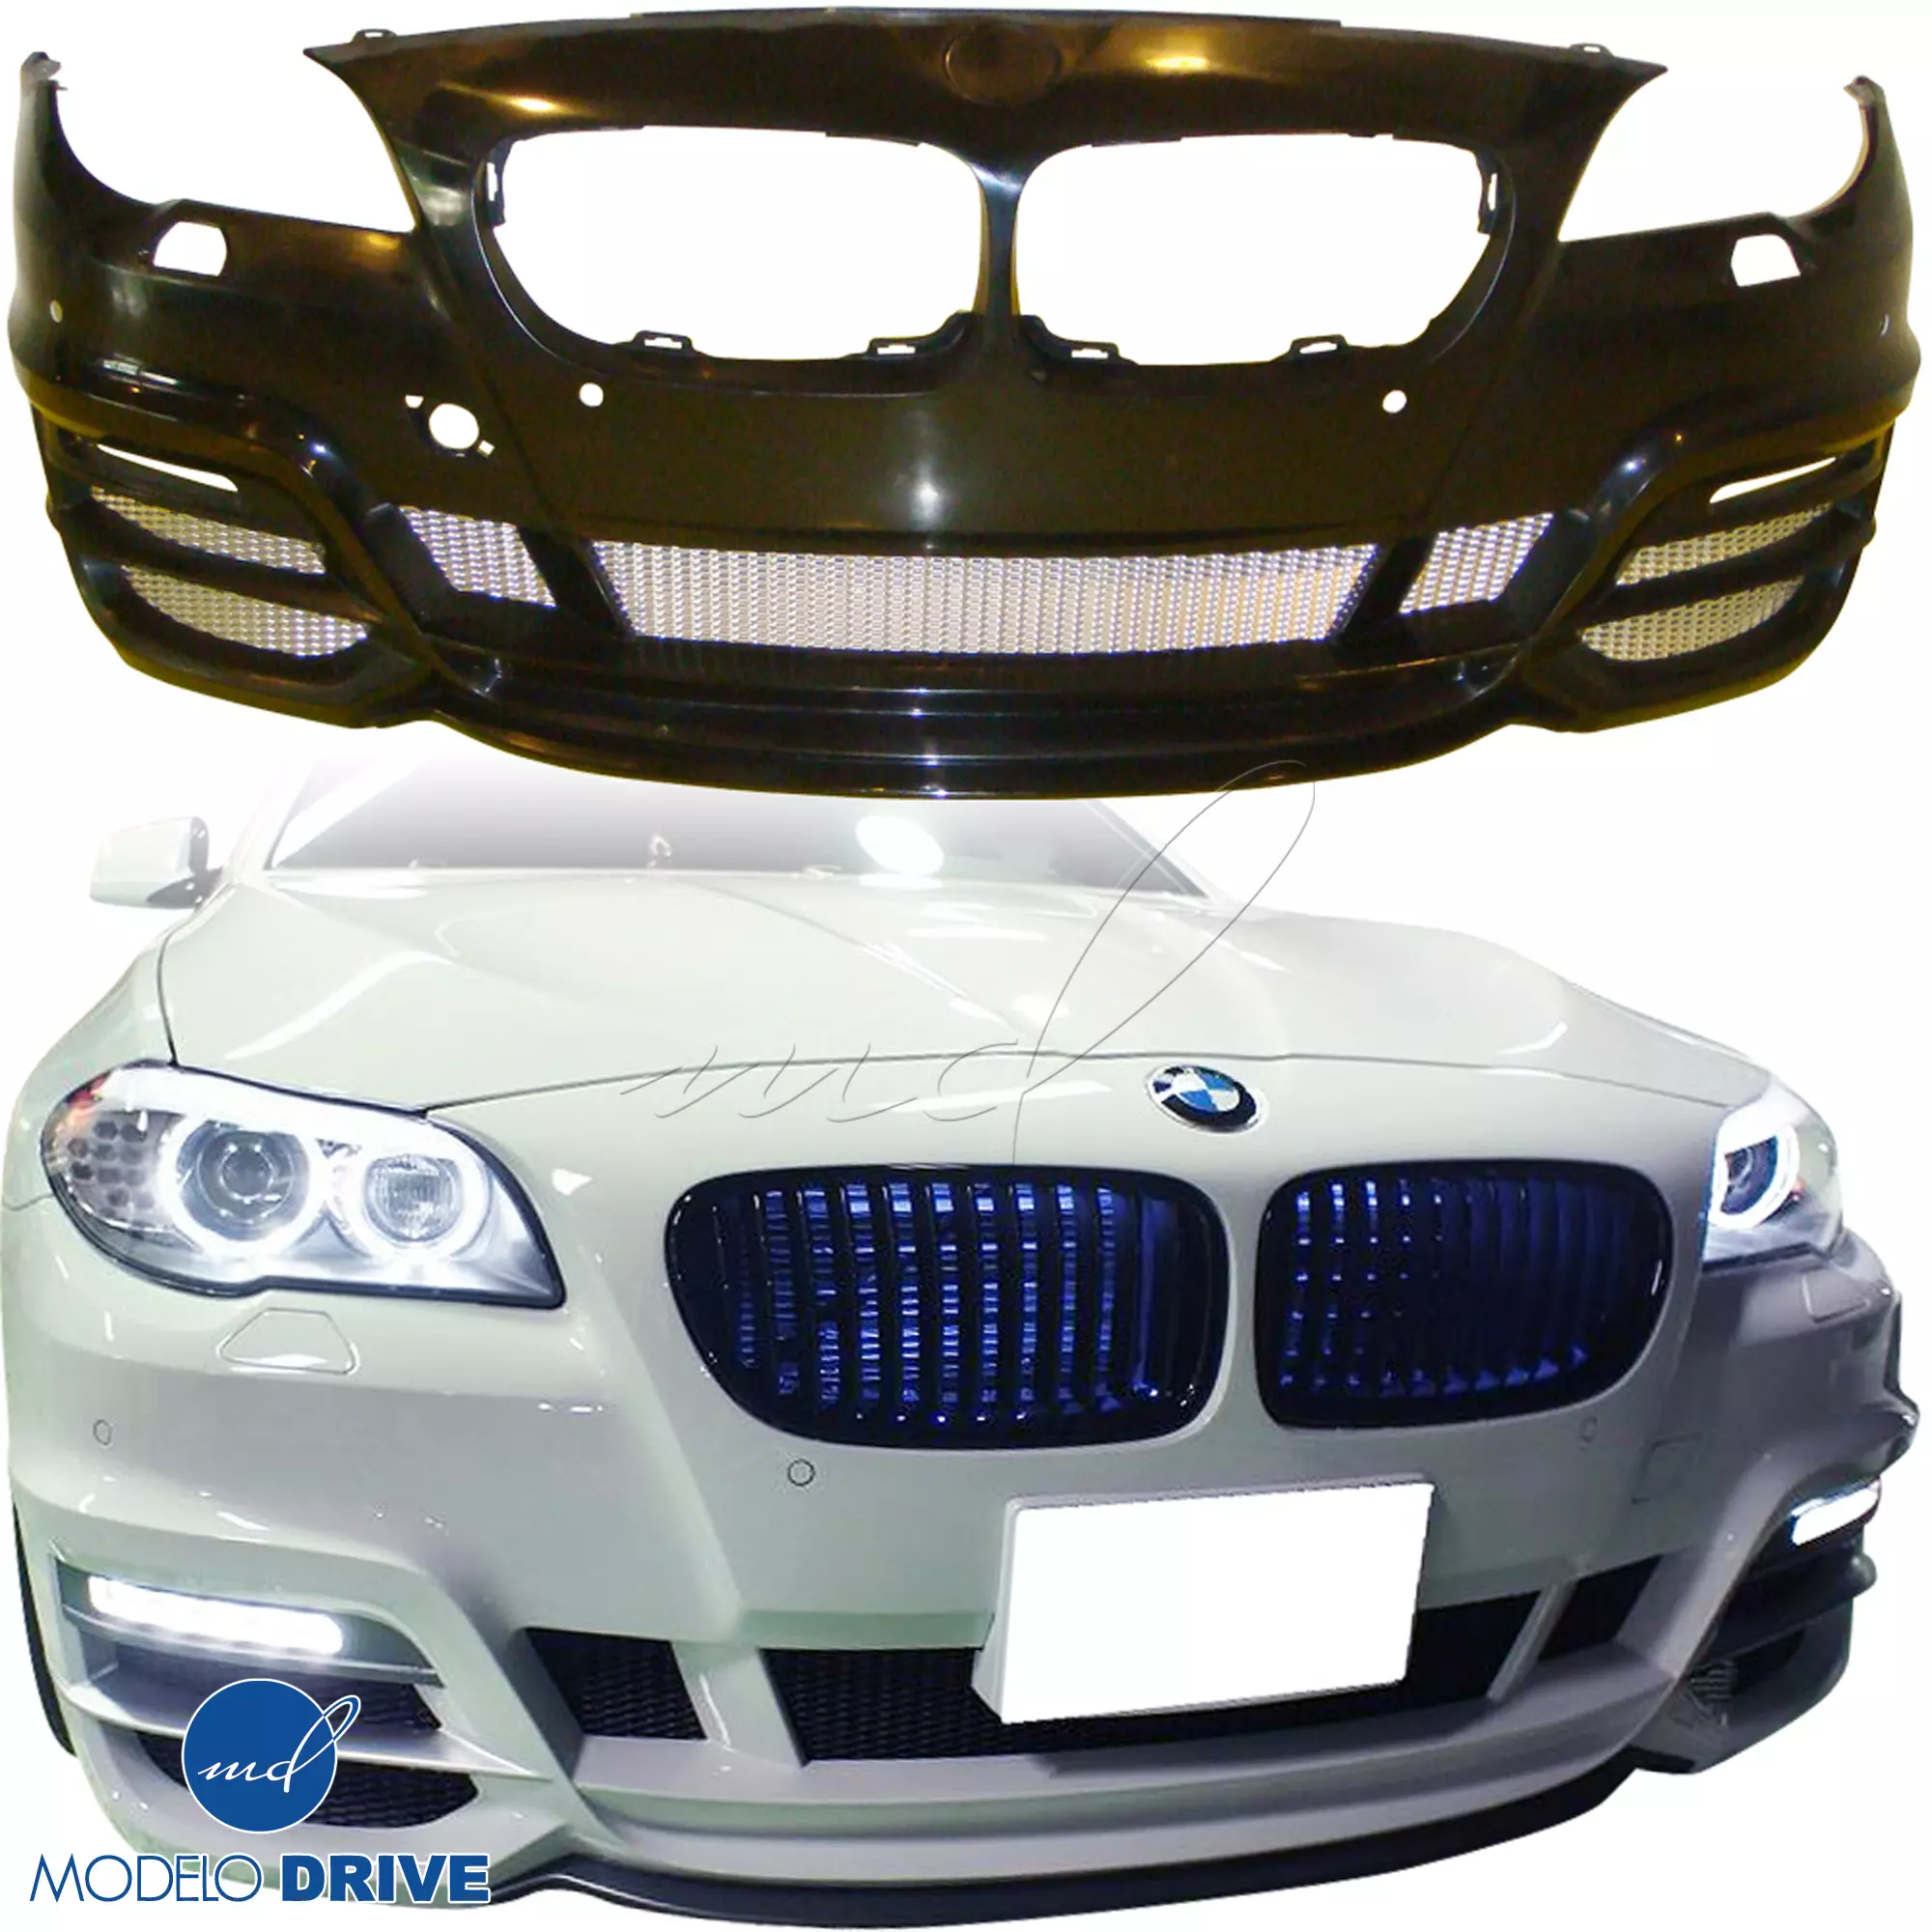 ModeloDrive FRP WAL Front Bumper > BMW 5-Series F10 2011-2016 > 4dr - Image 1